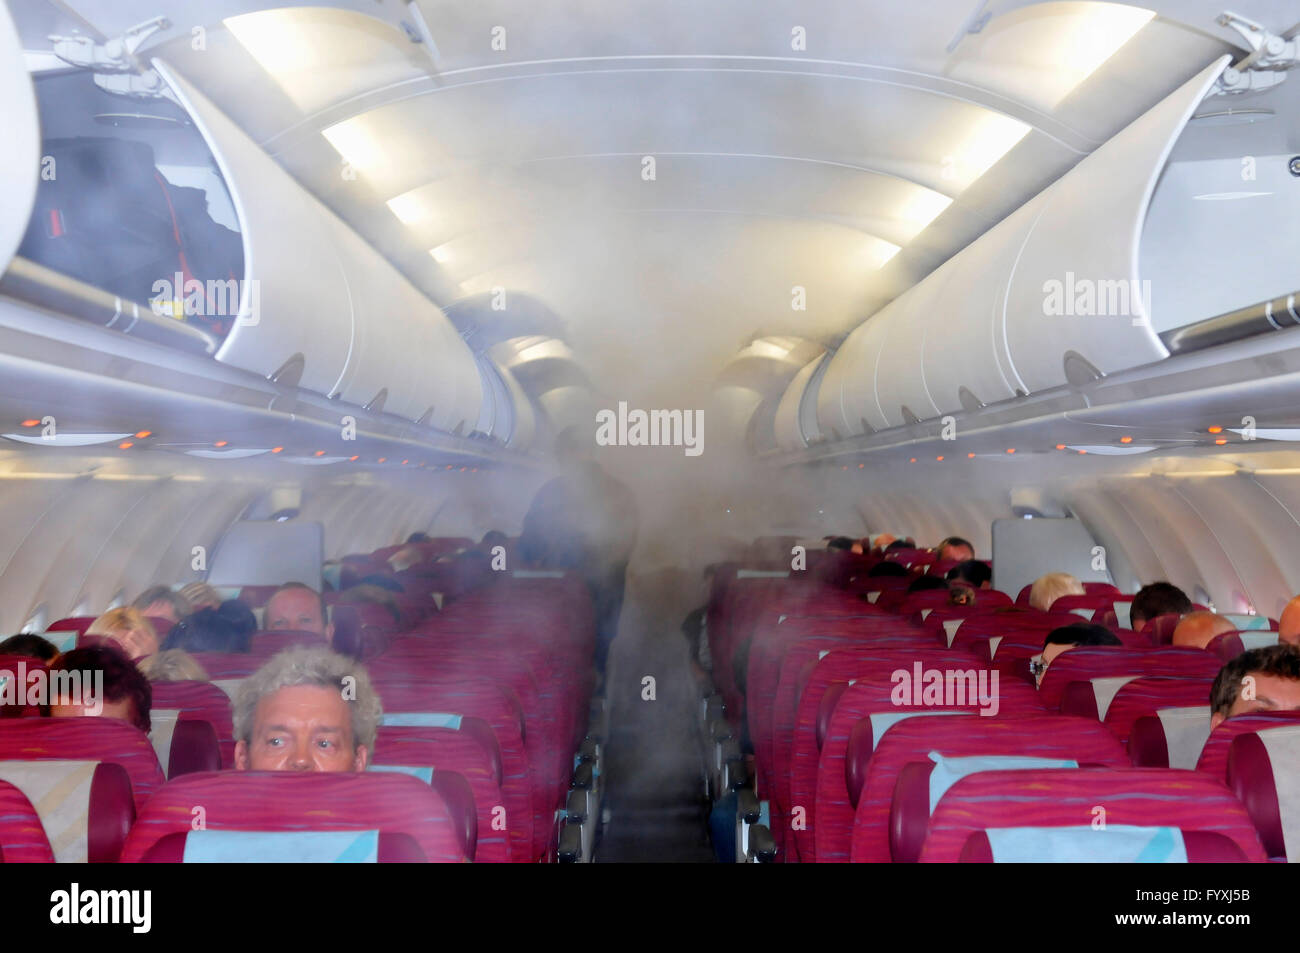 Vapour in airplane, Qatar Airways / air conditioning Stock Photo